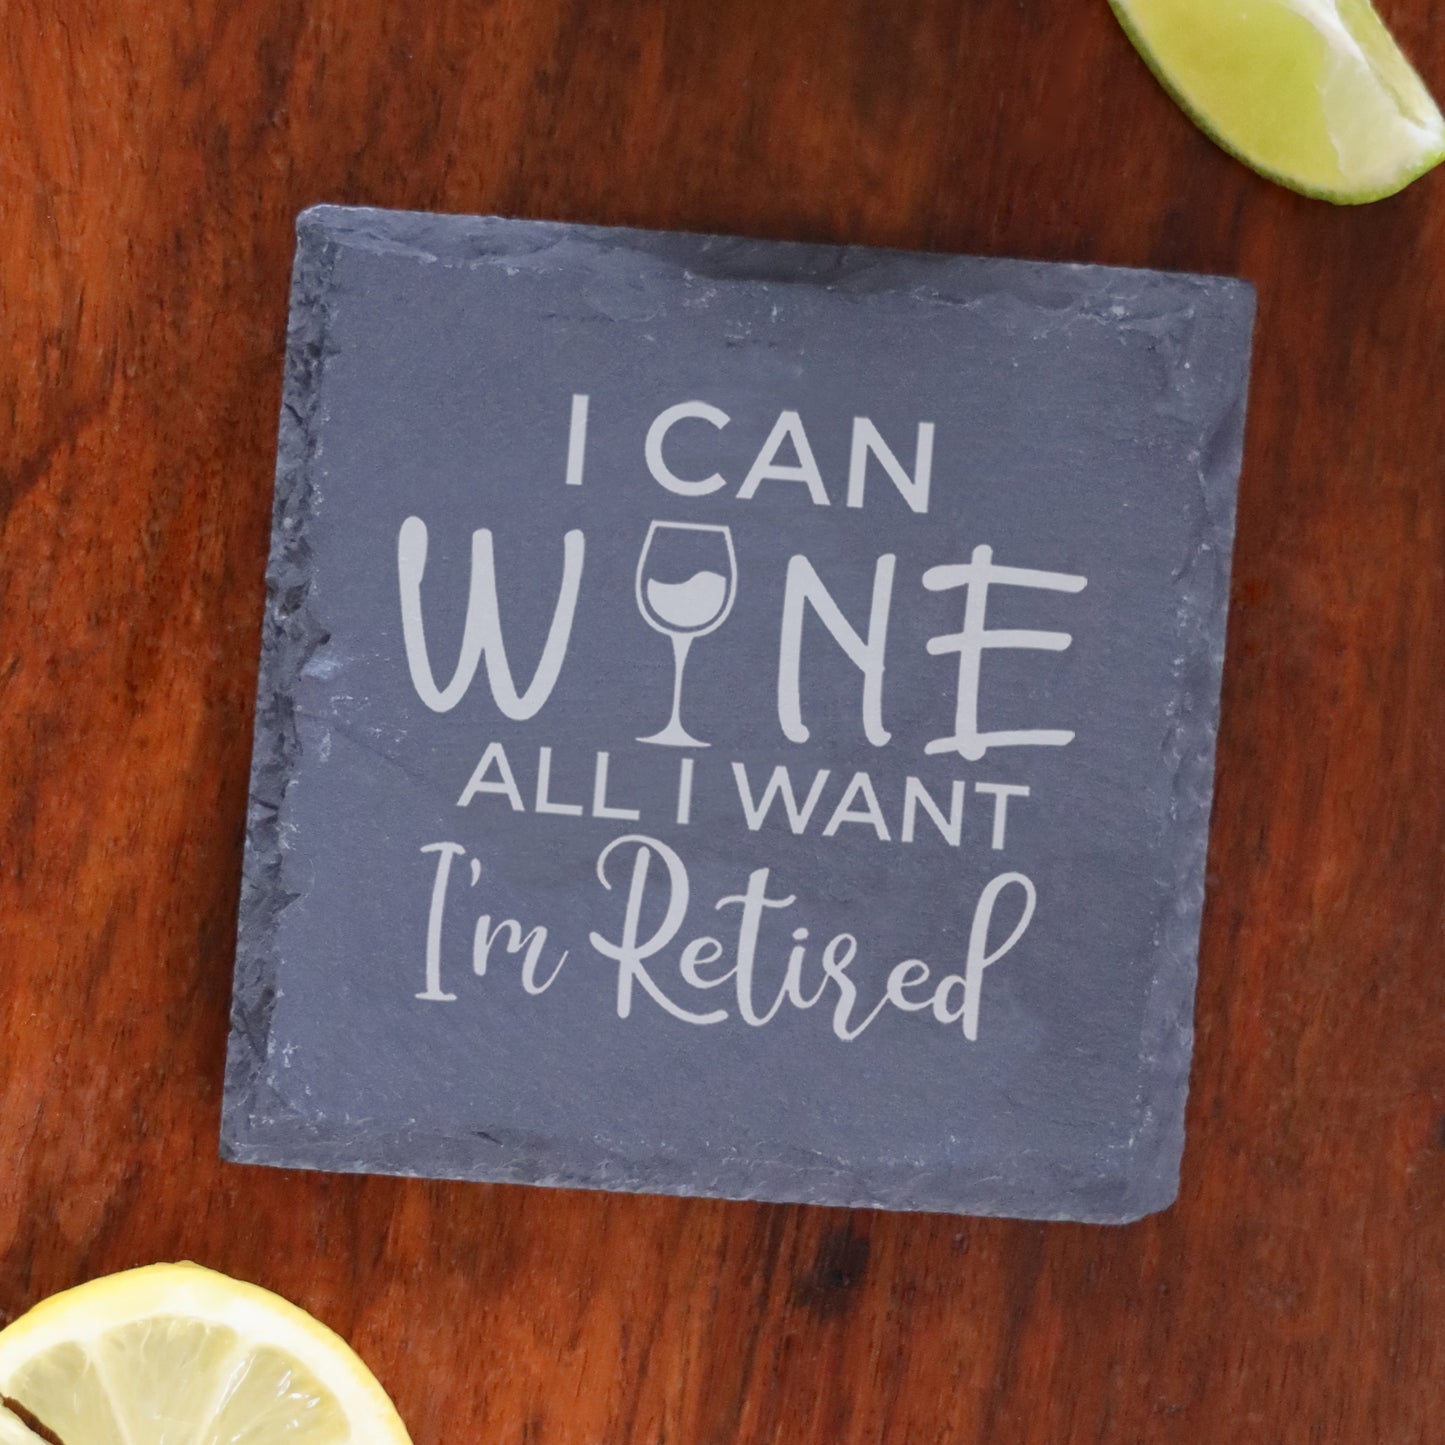 Engraved "I can wine all I want I'm retired" Funny Retirements and/or Coaster Novelty Gift  - Always Looking Good - Square Coaster Only  